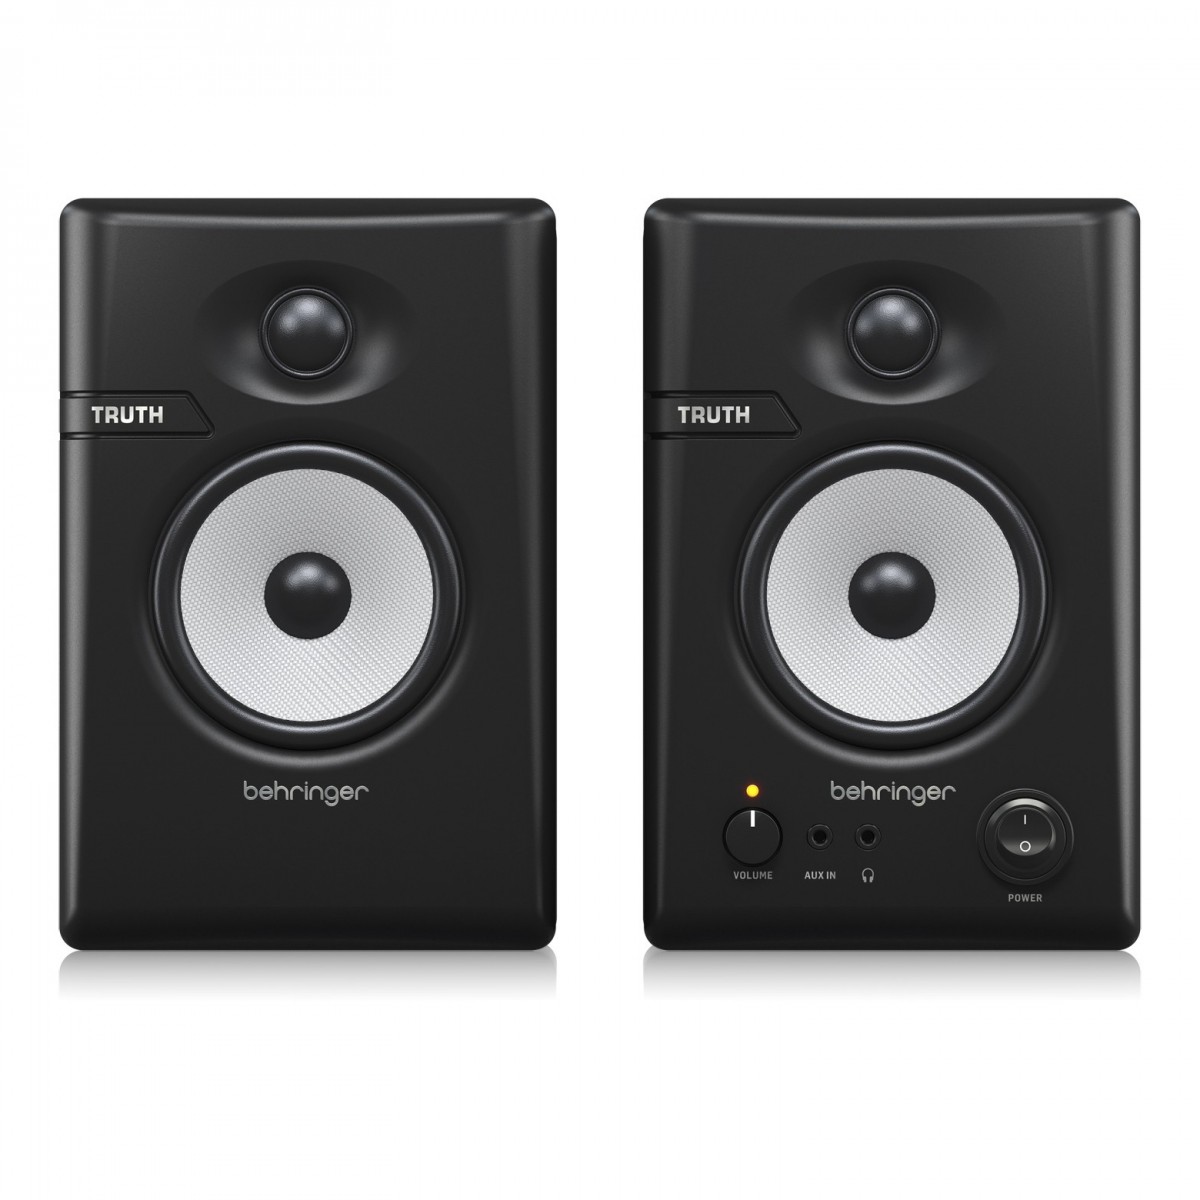 BEHRINGER TRUTH 3.5 COPPIA MONITOR STUDIO 64W WOOFER 3.5